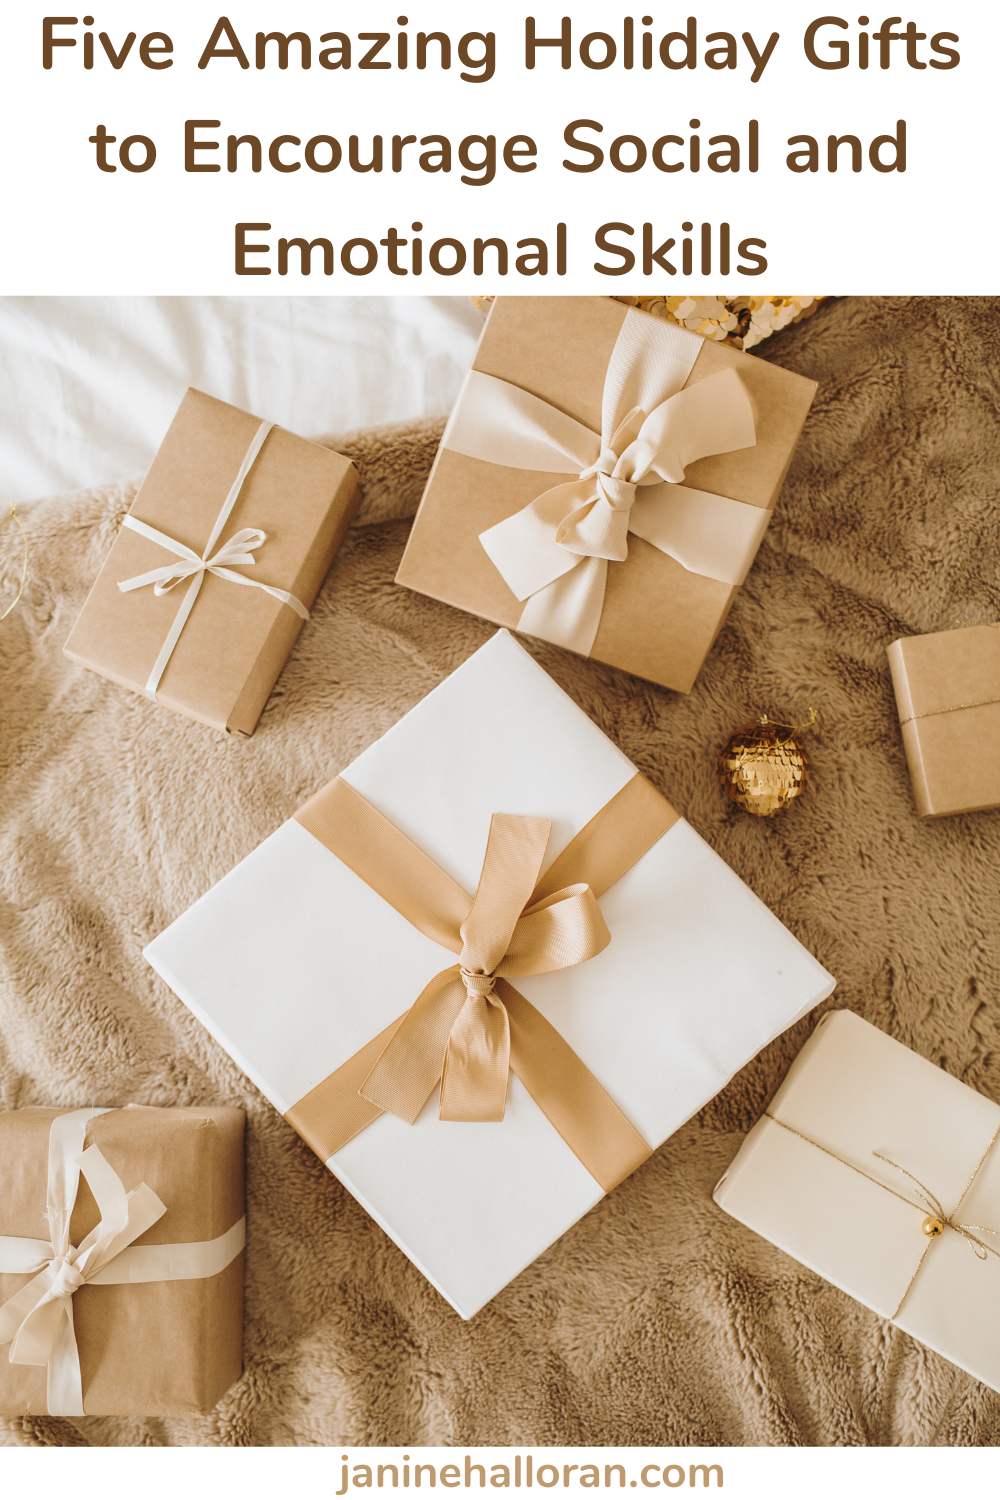 Five Amazing Holiday Gifts to Encourage Social and Emotional